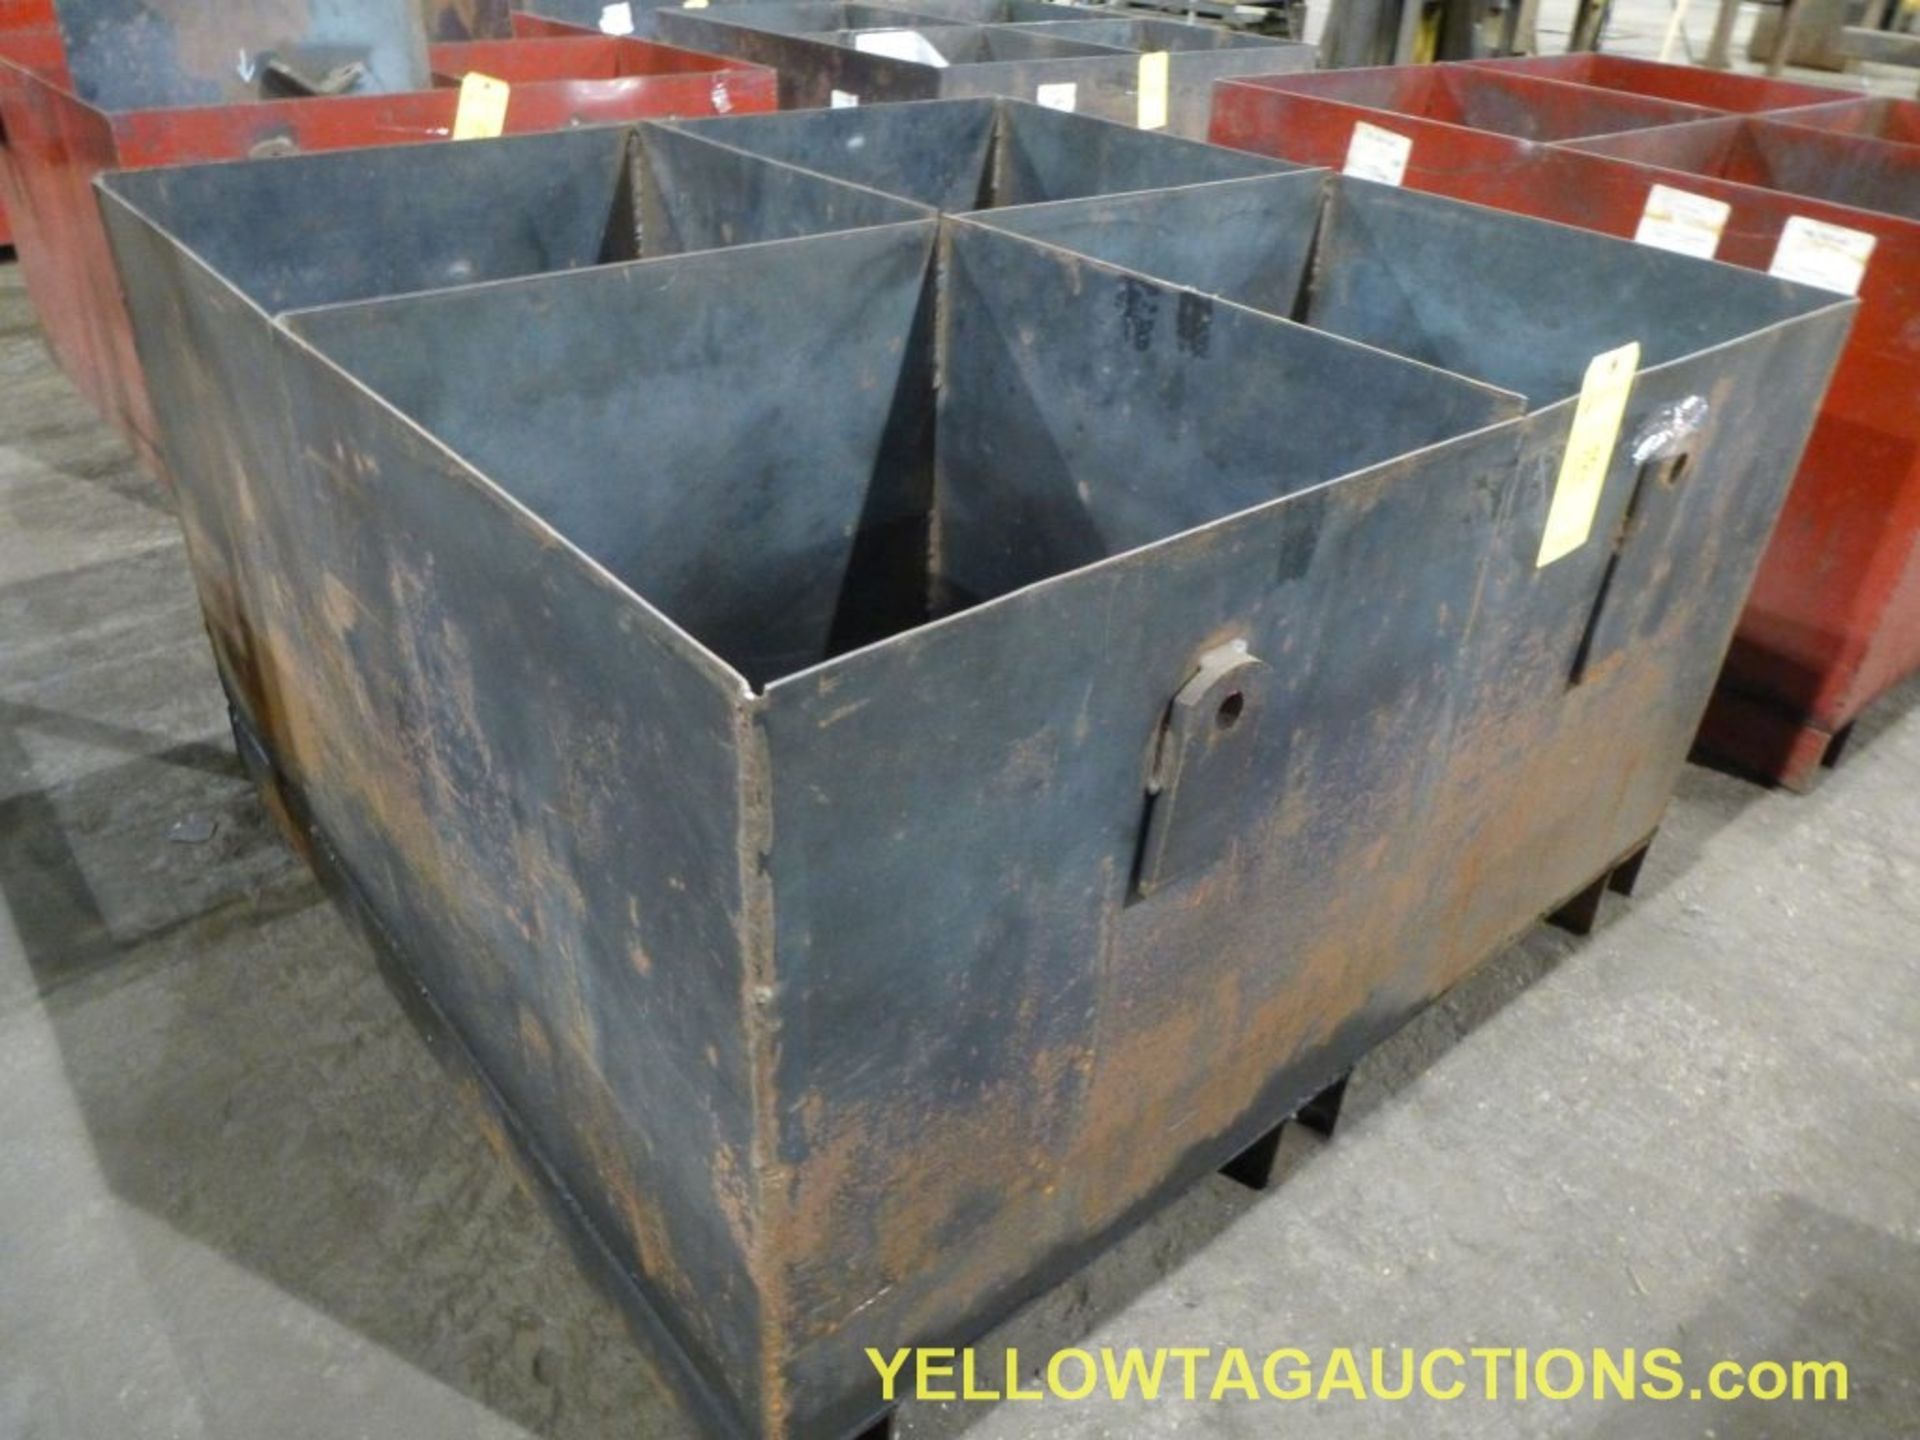 Lot of (1) 4-Section Parts Bin|Tag: 139 - Image 2 of 3